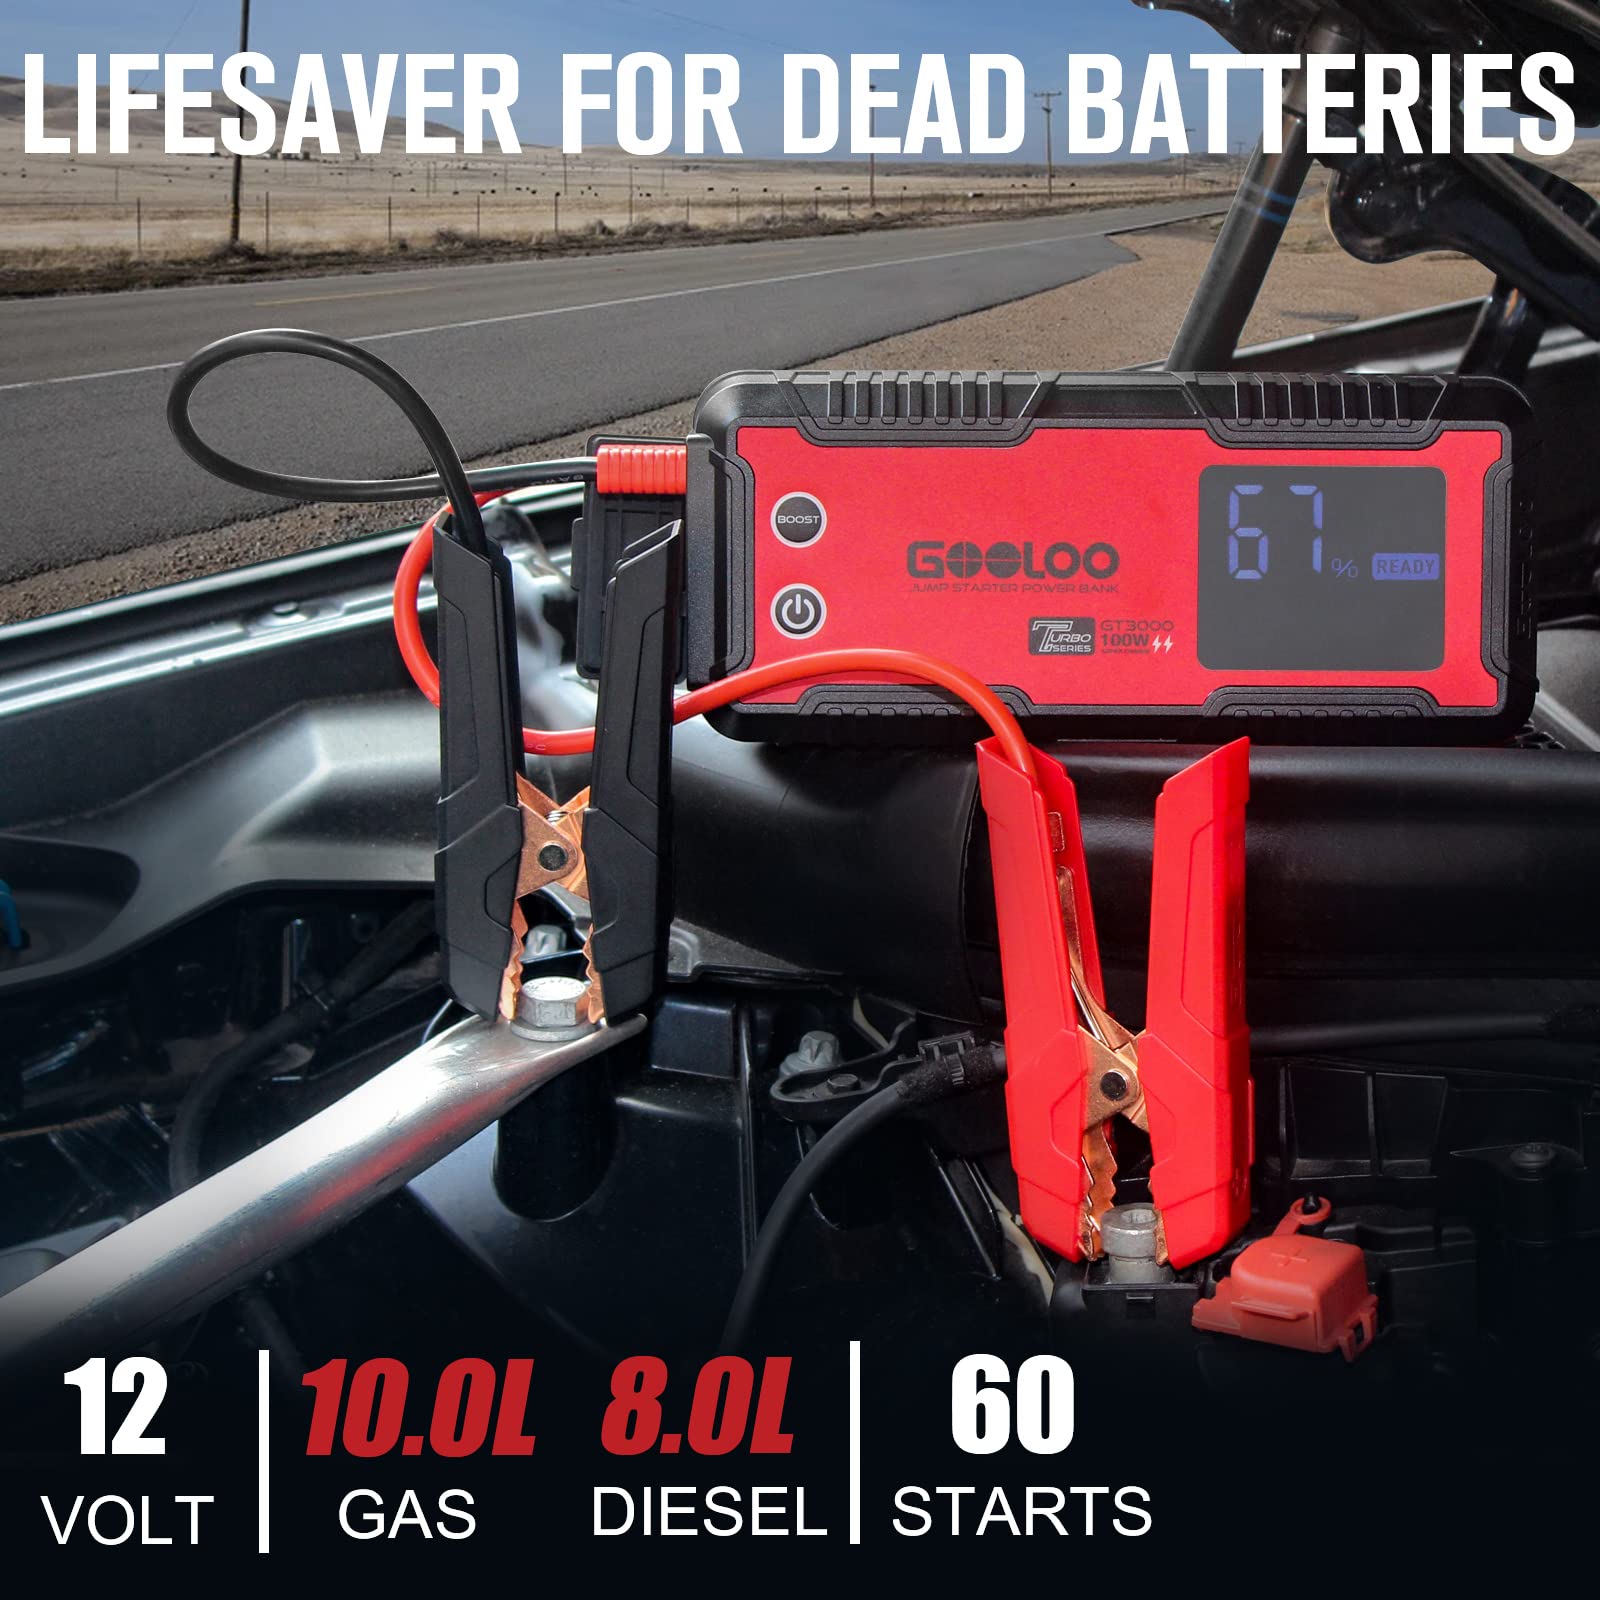 GOOLOO Car Jump Starter,3000A Peak 100W 2-Way Fast Charging Battery Jump Starter for 10.0L Gas and 8.0L Diesel,IP65 12V Jumper Box Power Bank - image 3 of 9